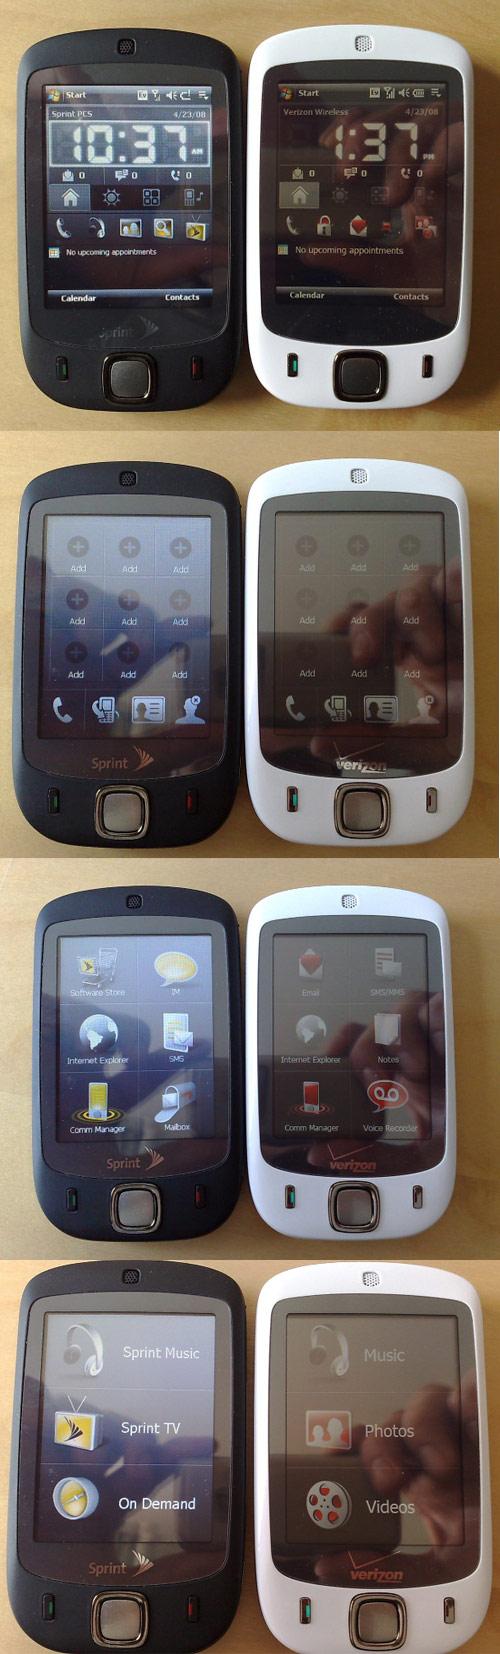 HTC Touch side by side images 